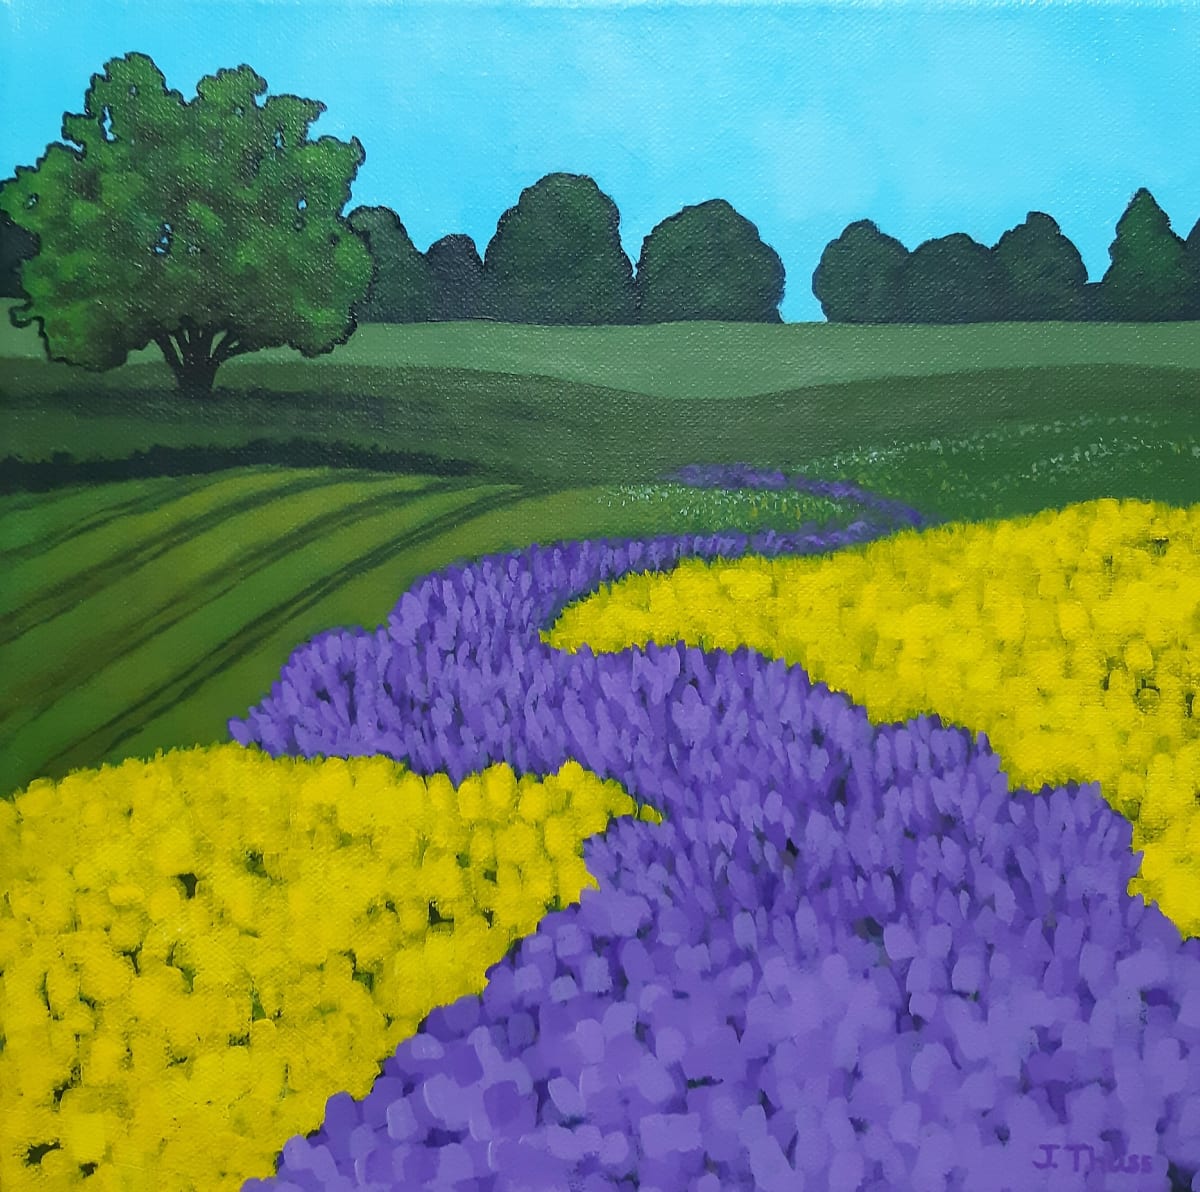 Purple Trail by Jane Thuss  Image: A purple trail of flowers winds its way through farm fields of green and yellow.